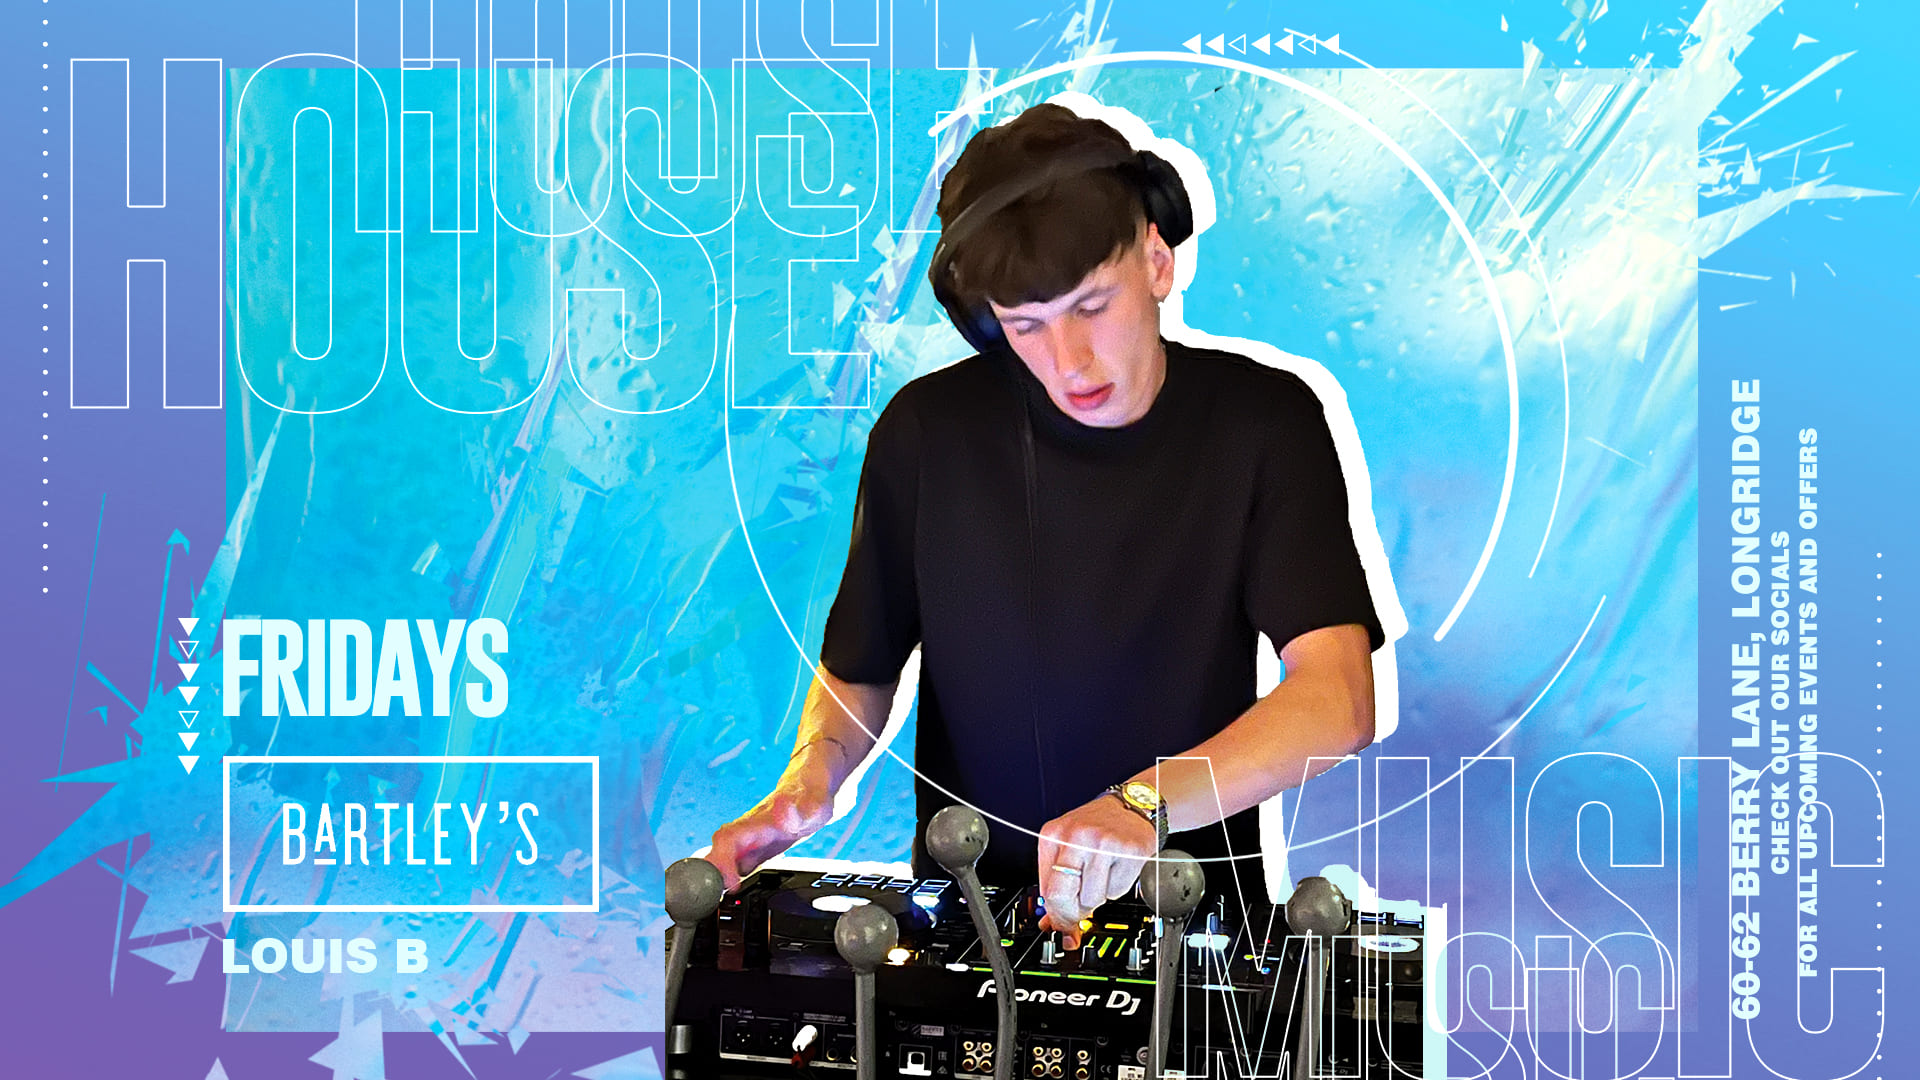 Friday Nights at Bartley's - All Things House Music with DJ Bucko